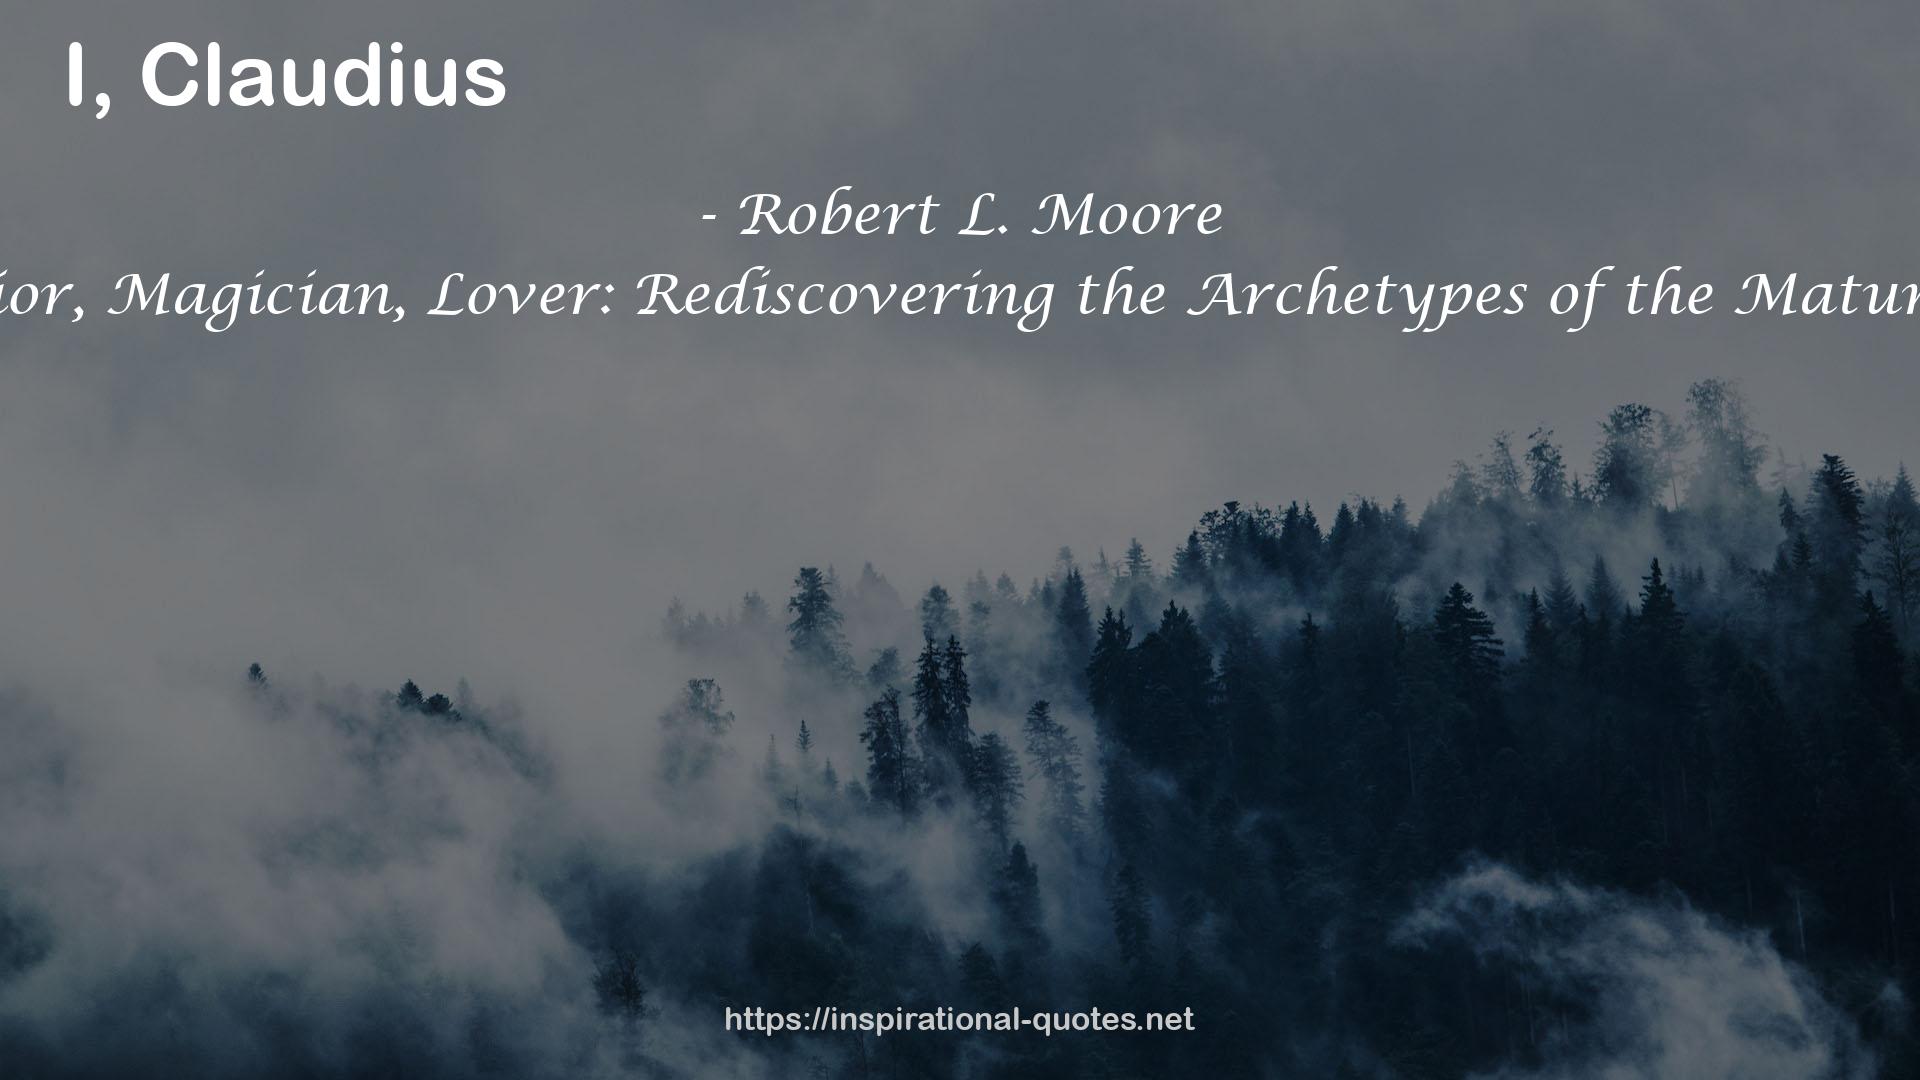 King, Warrior, Magician, Lover: Rediscovering the Archetypes of the Mature Masculine QUOTES